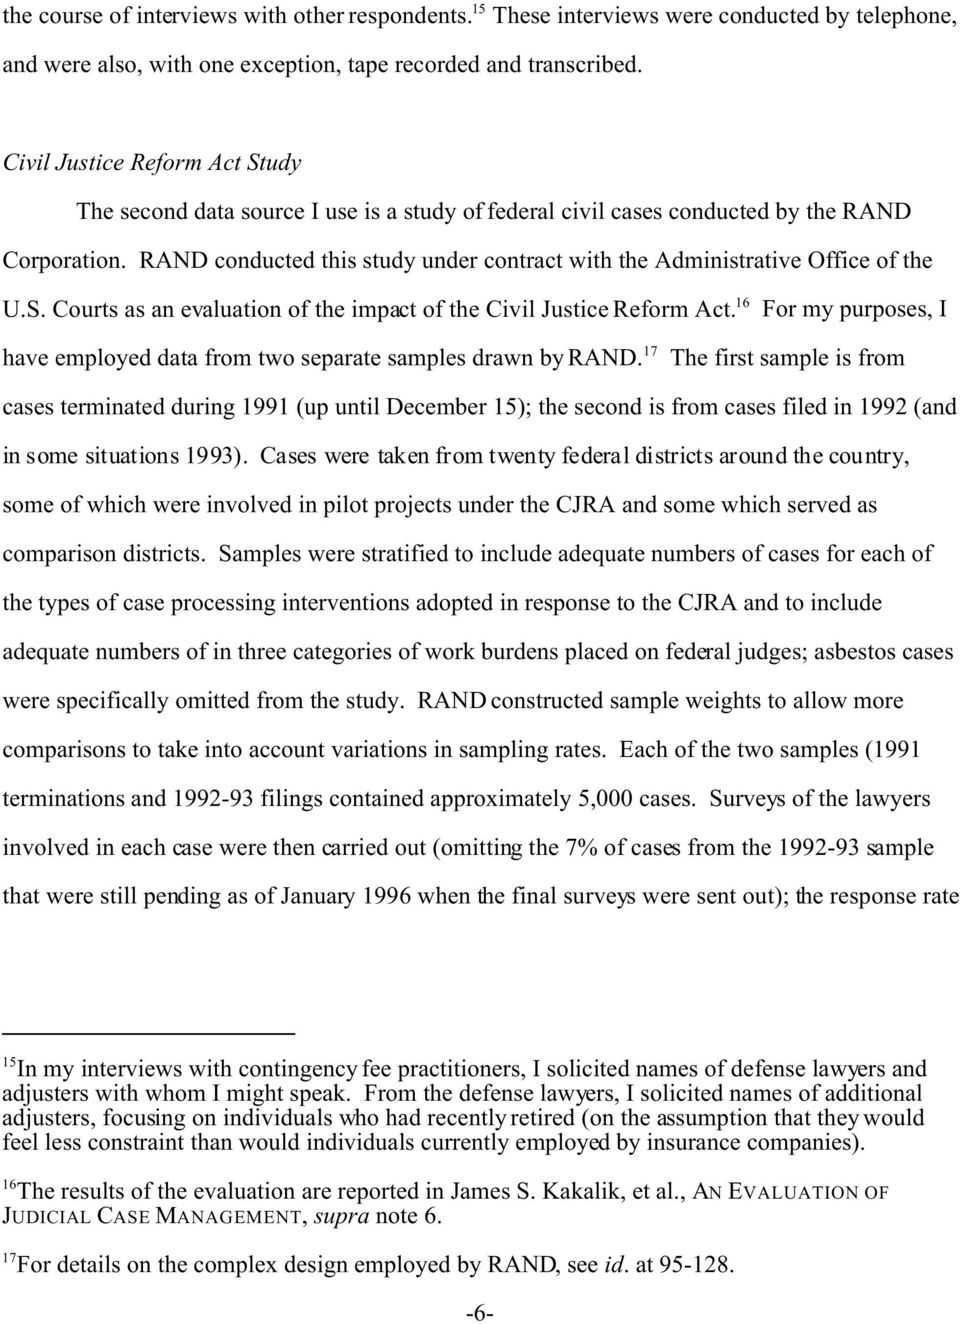 RAND conducted this study under contract with the Administrative Office of the U.S. Courts as an evaluation of the impact of the Civil Justice Reform Act.